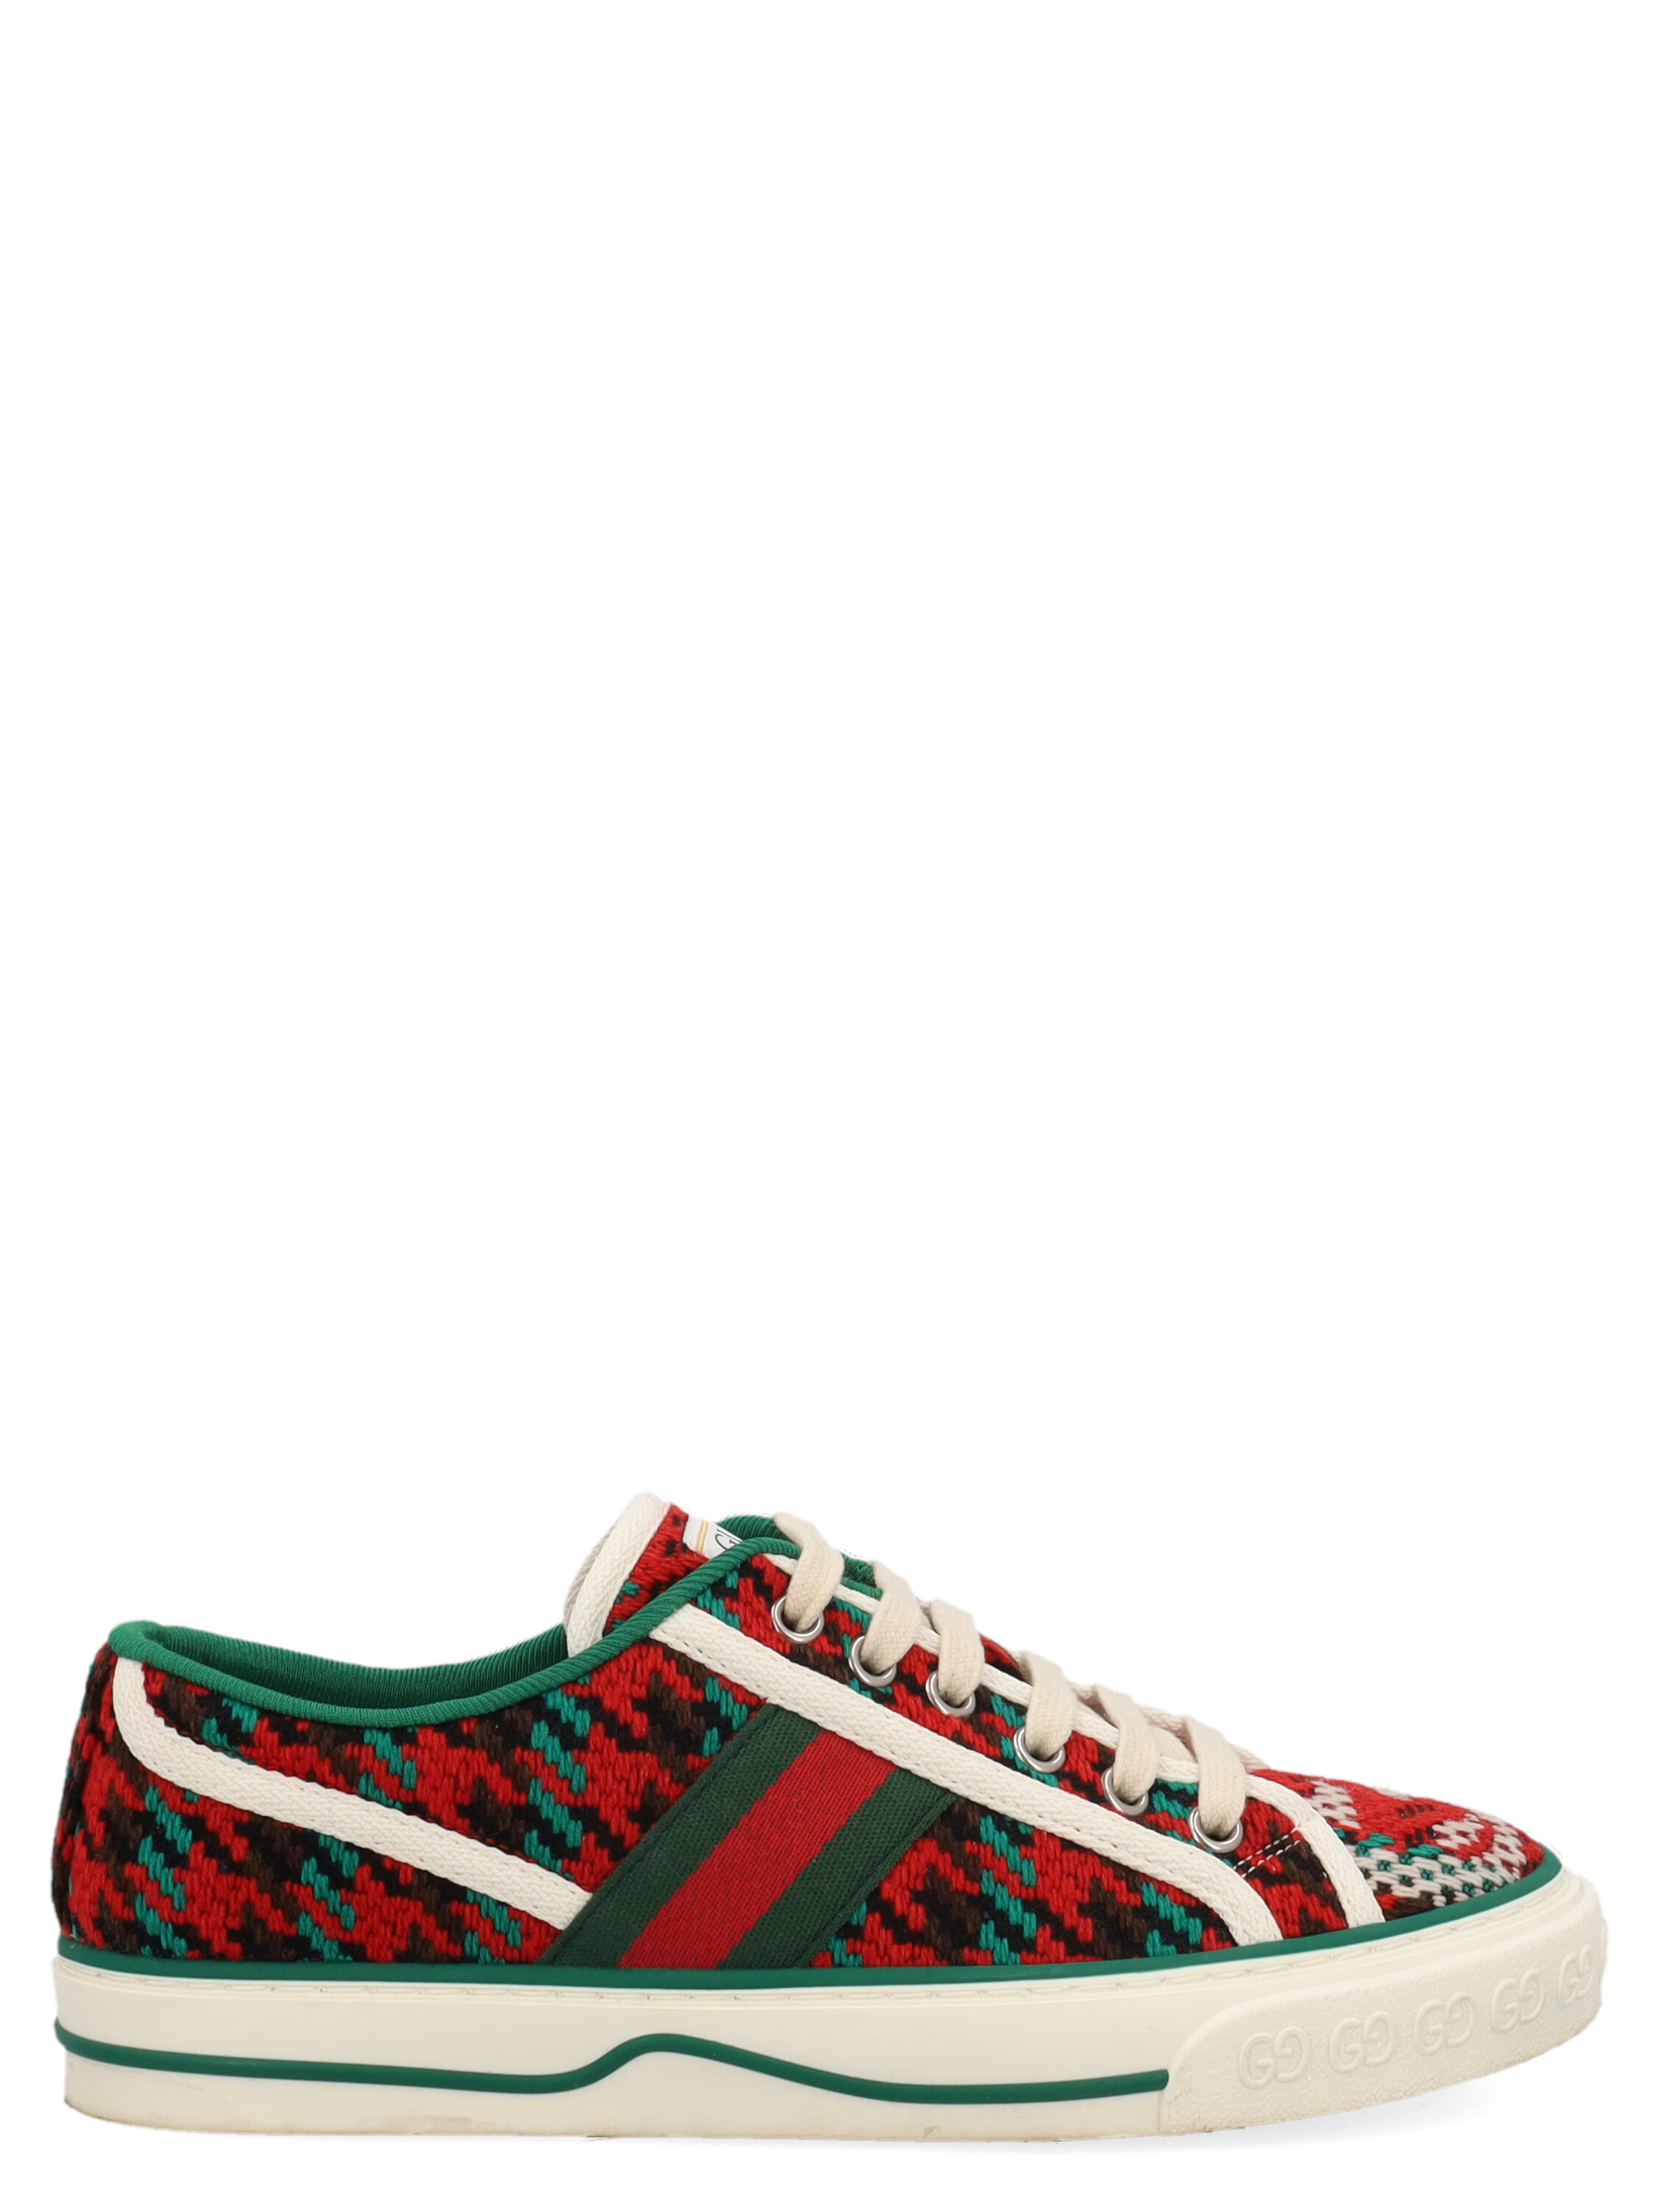 Pre-owned Gucci Women's Sneakers -  - In Green, Red It 36